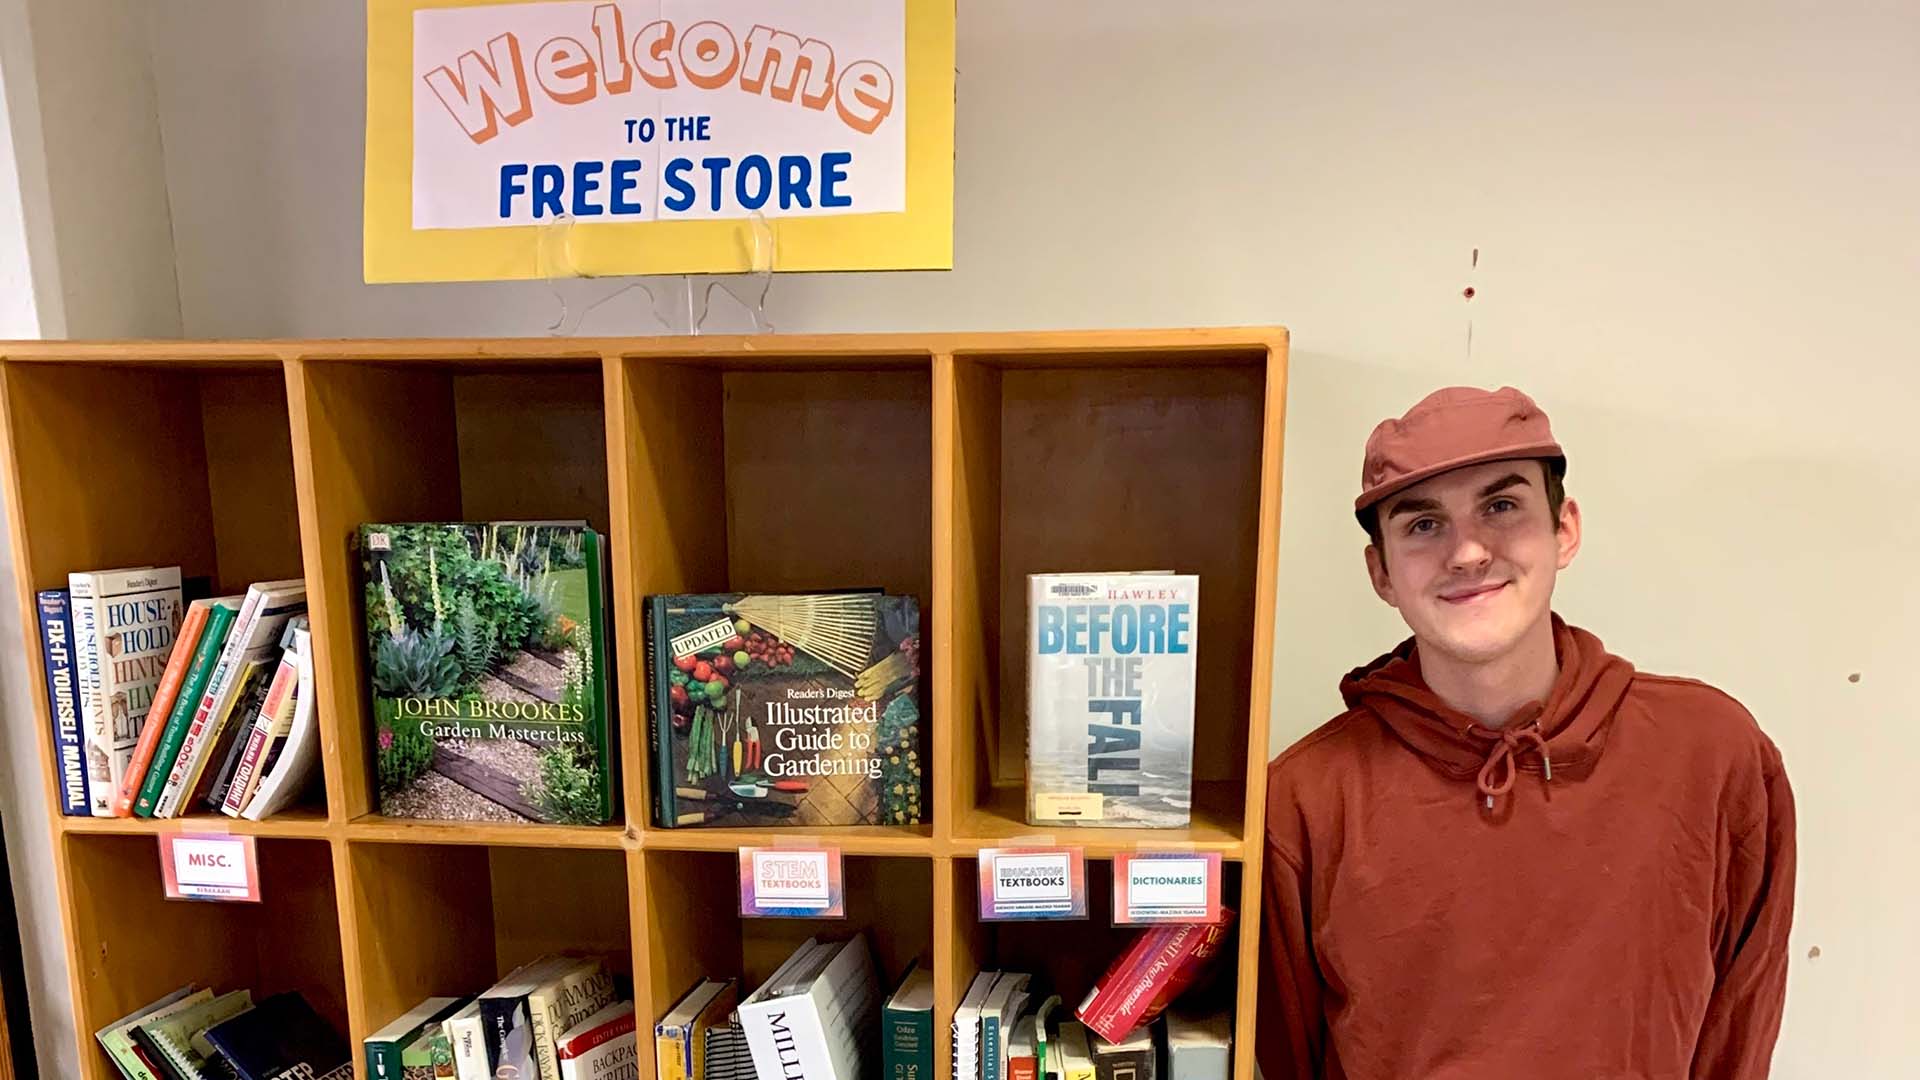 A male student in a red shirt and orange jacket poses by a bookcase filled with items in BSU's free store. A sign above the bookcase reads "Welcome to the Free Store"